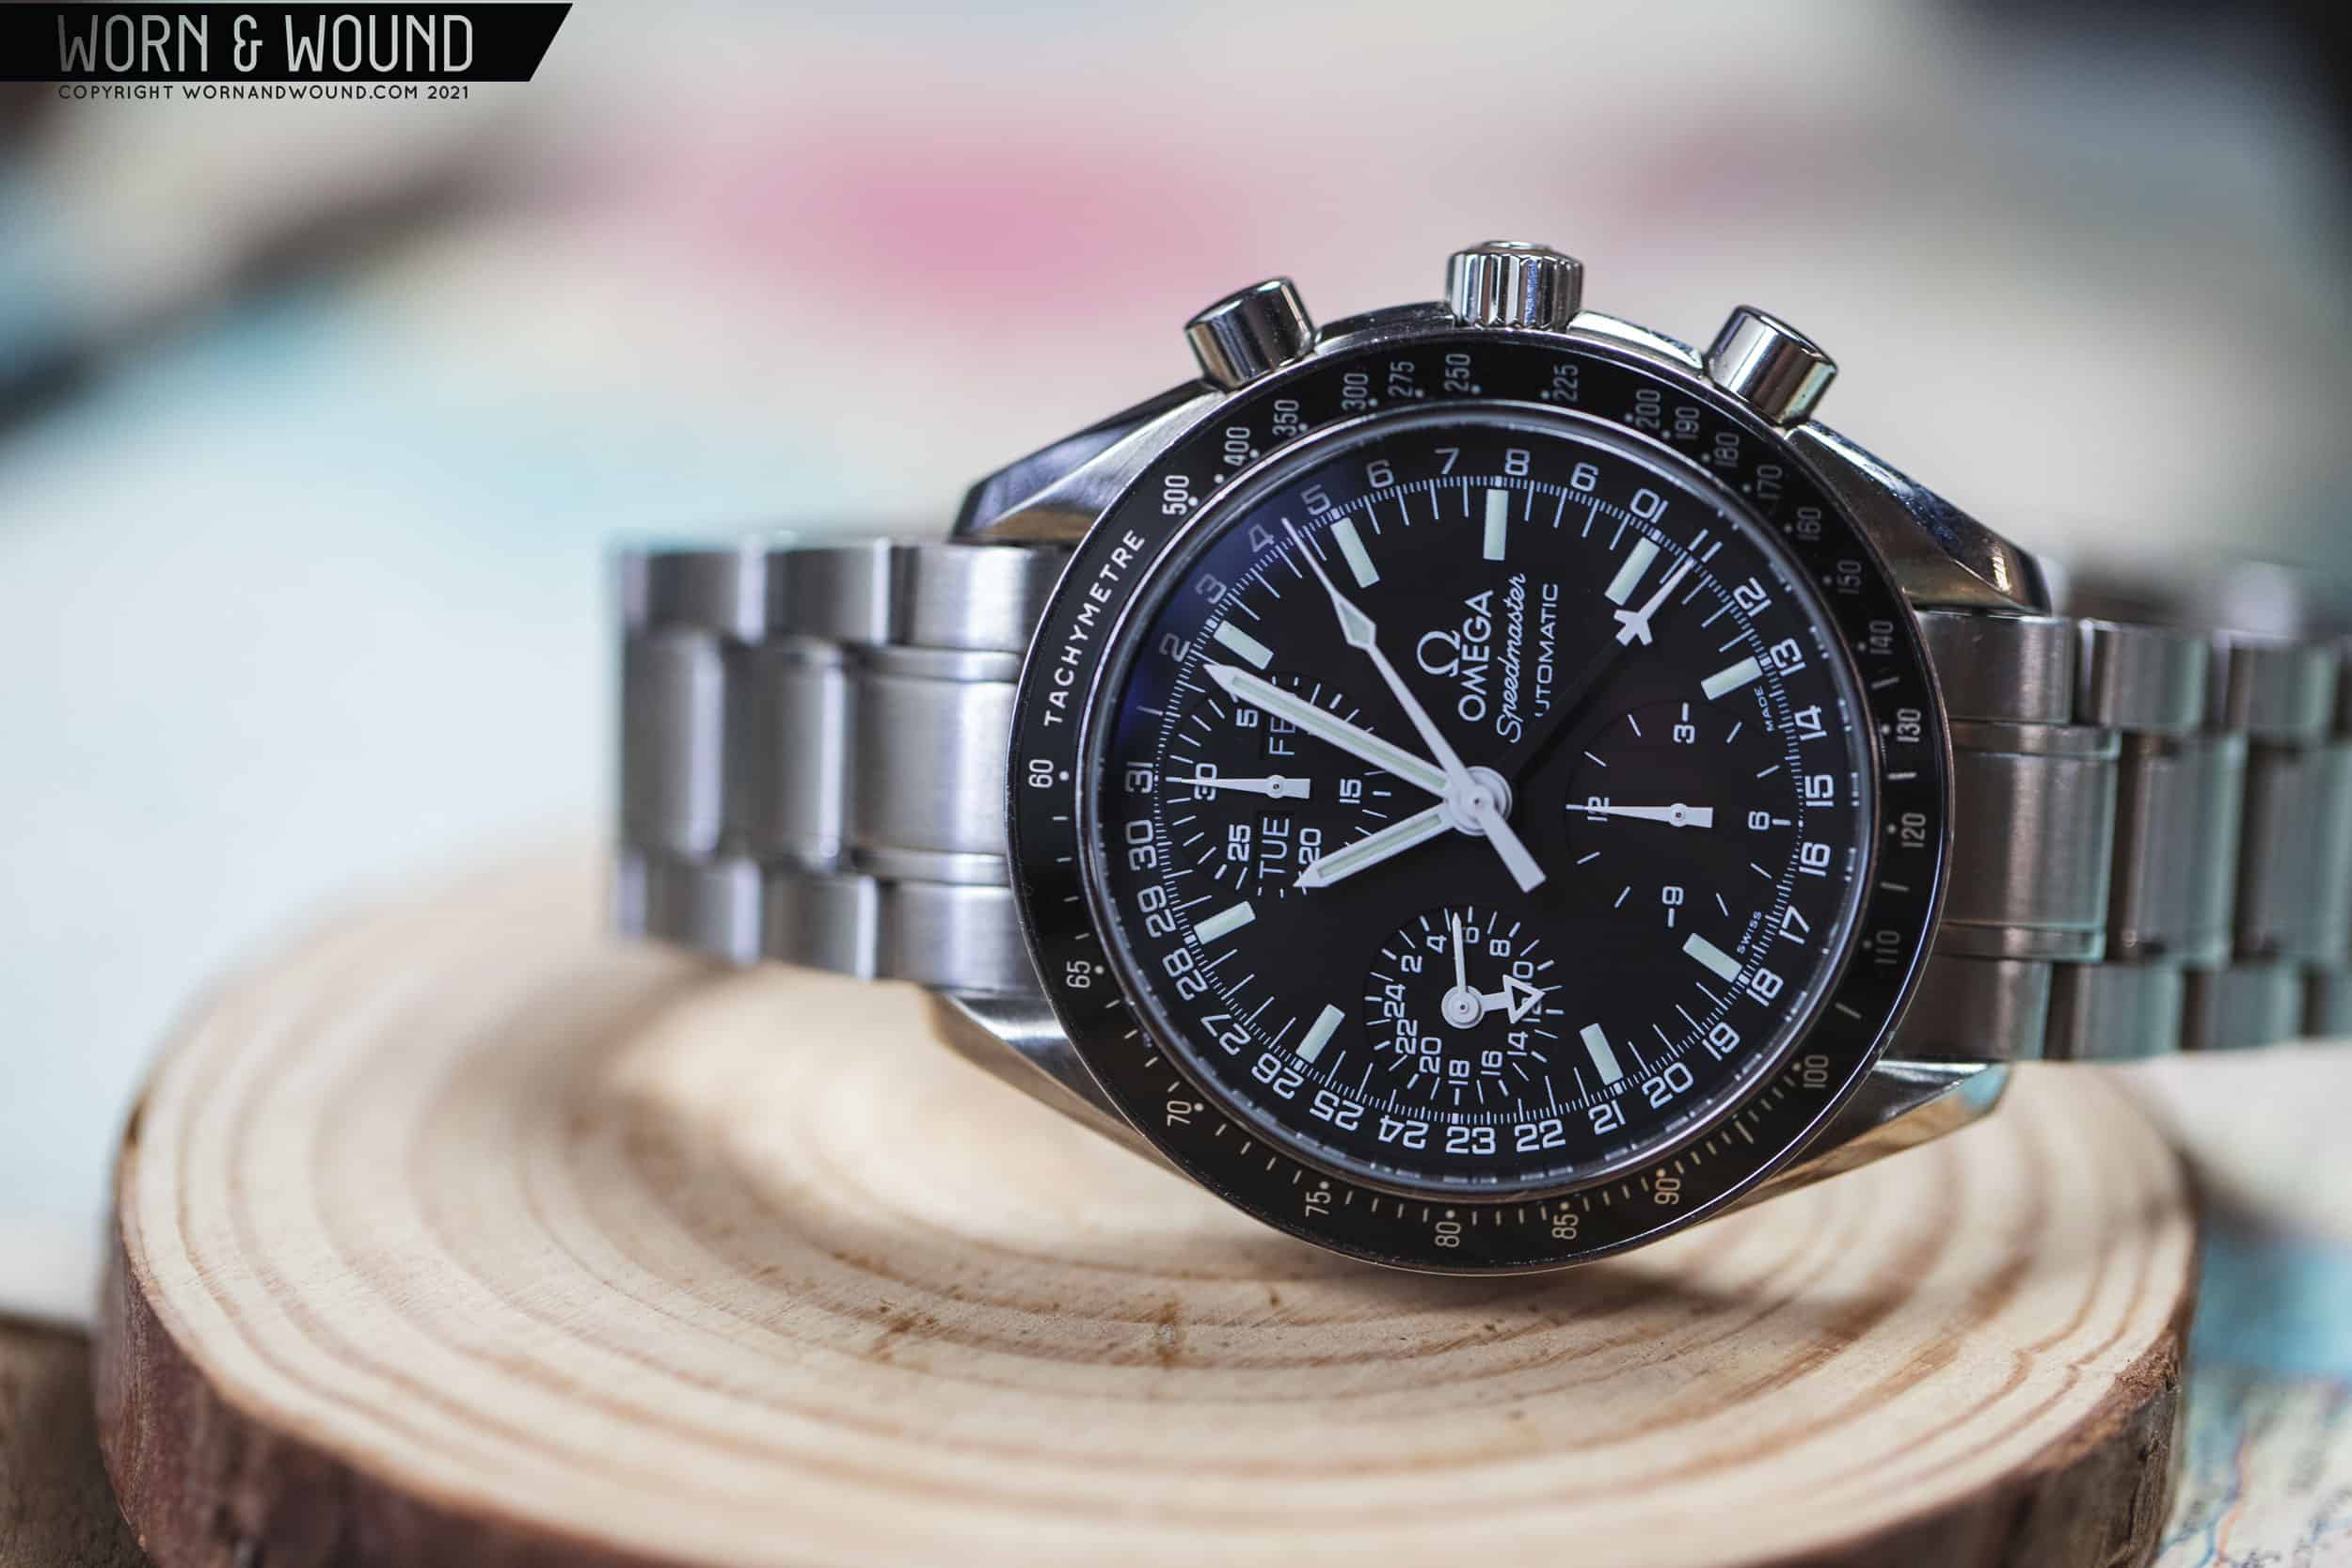 Owner's Review: the Omega Speedmaster Automatic Day-Date 3520.50.00 - Worn  u0026 Wound